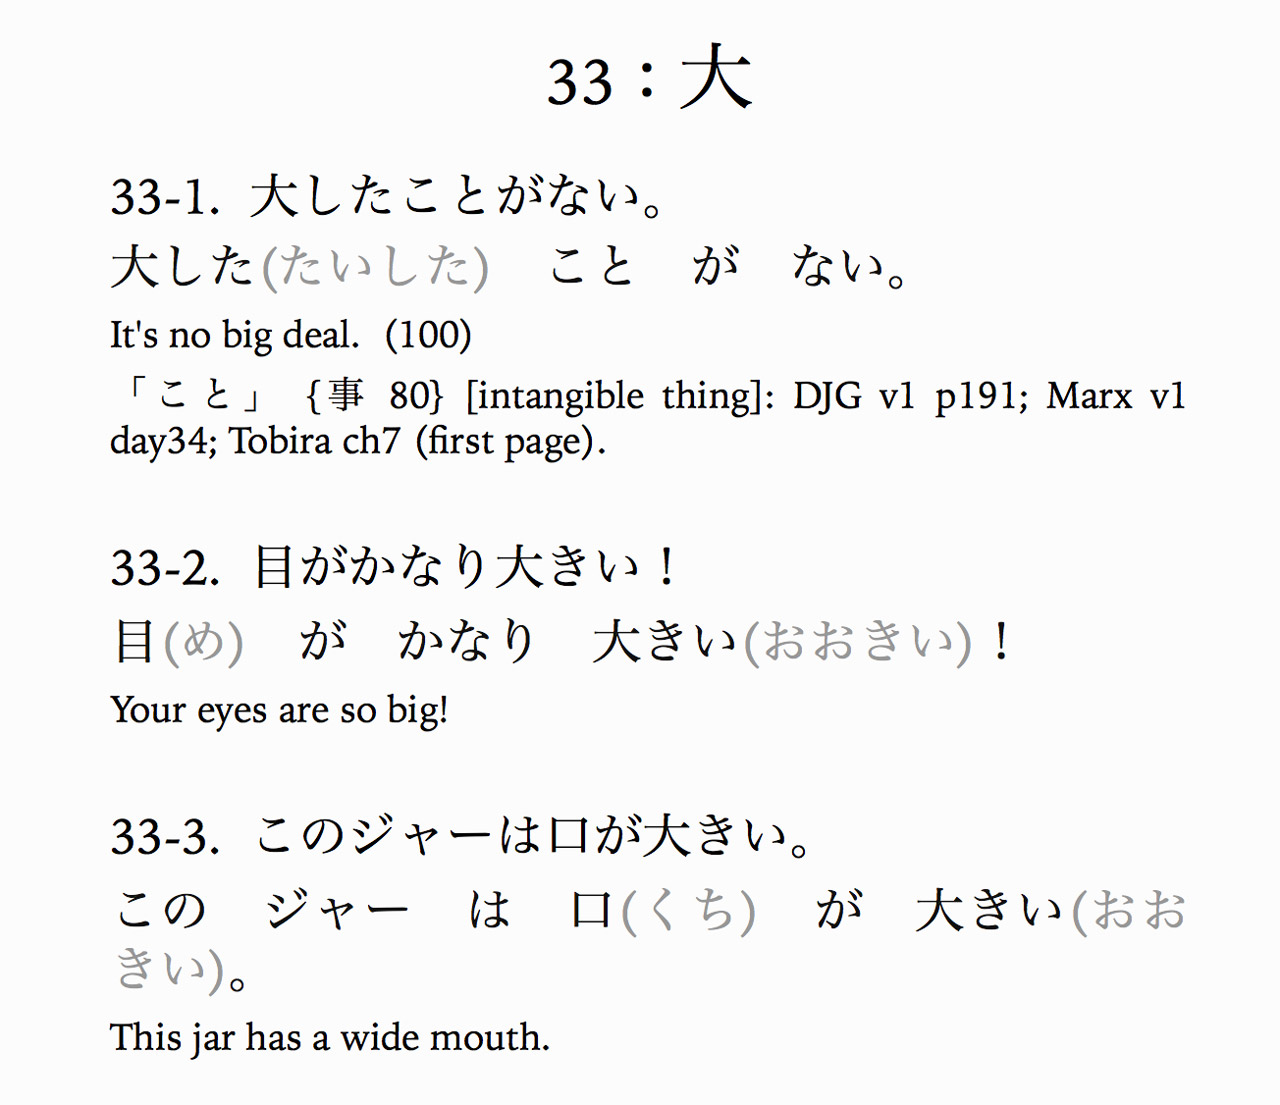 comparison of pages from kanji learners course